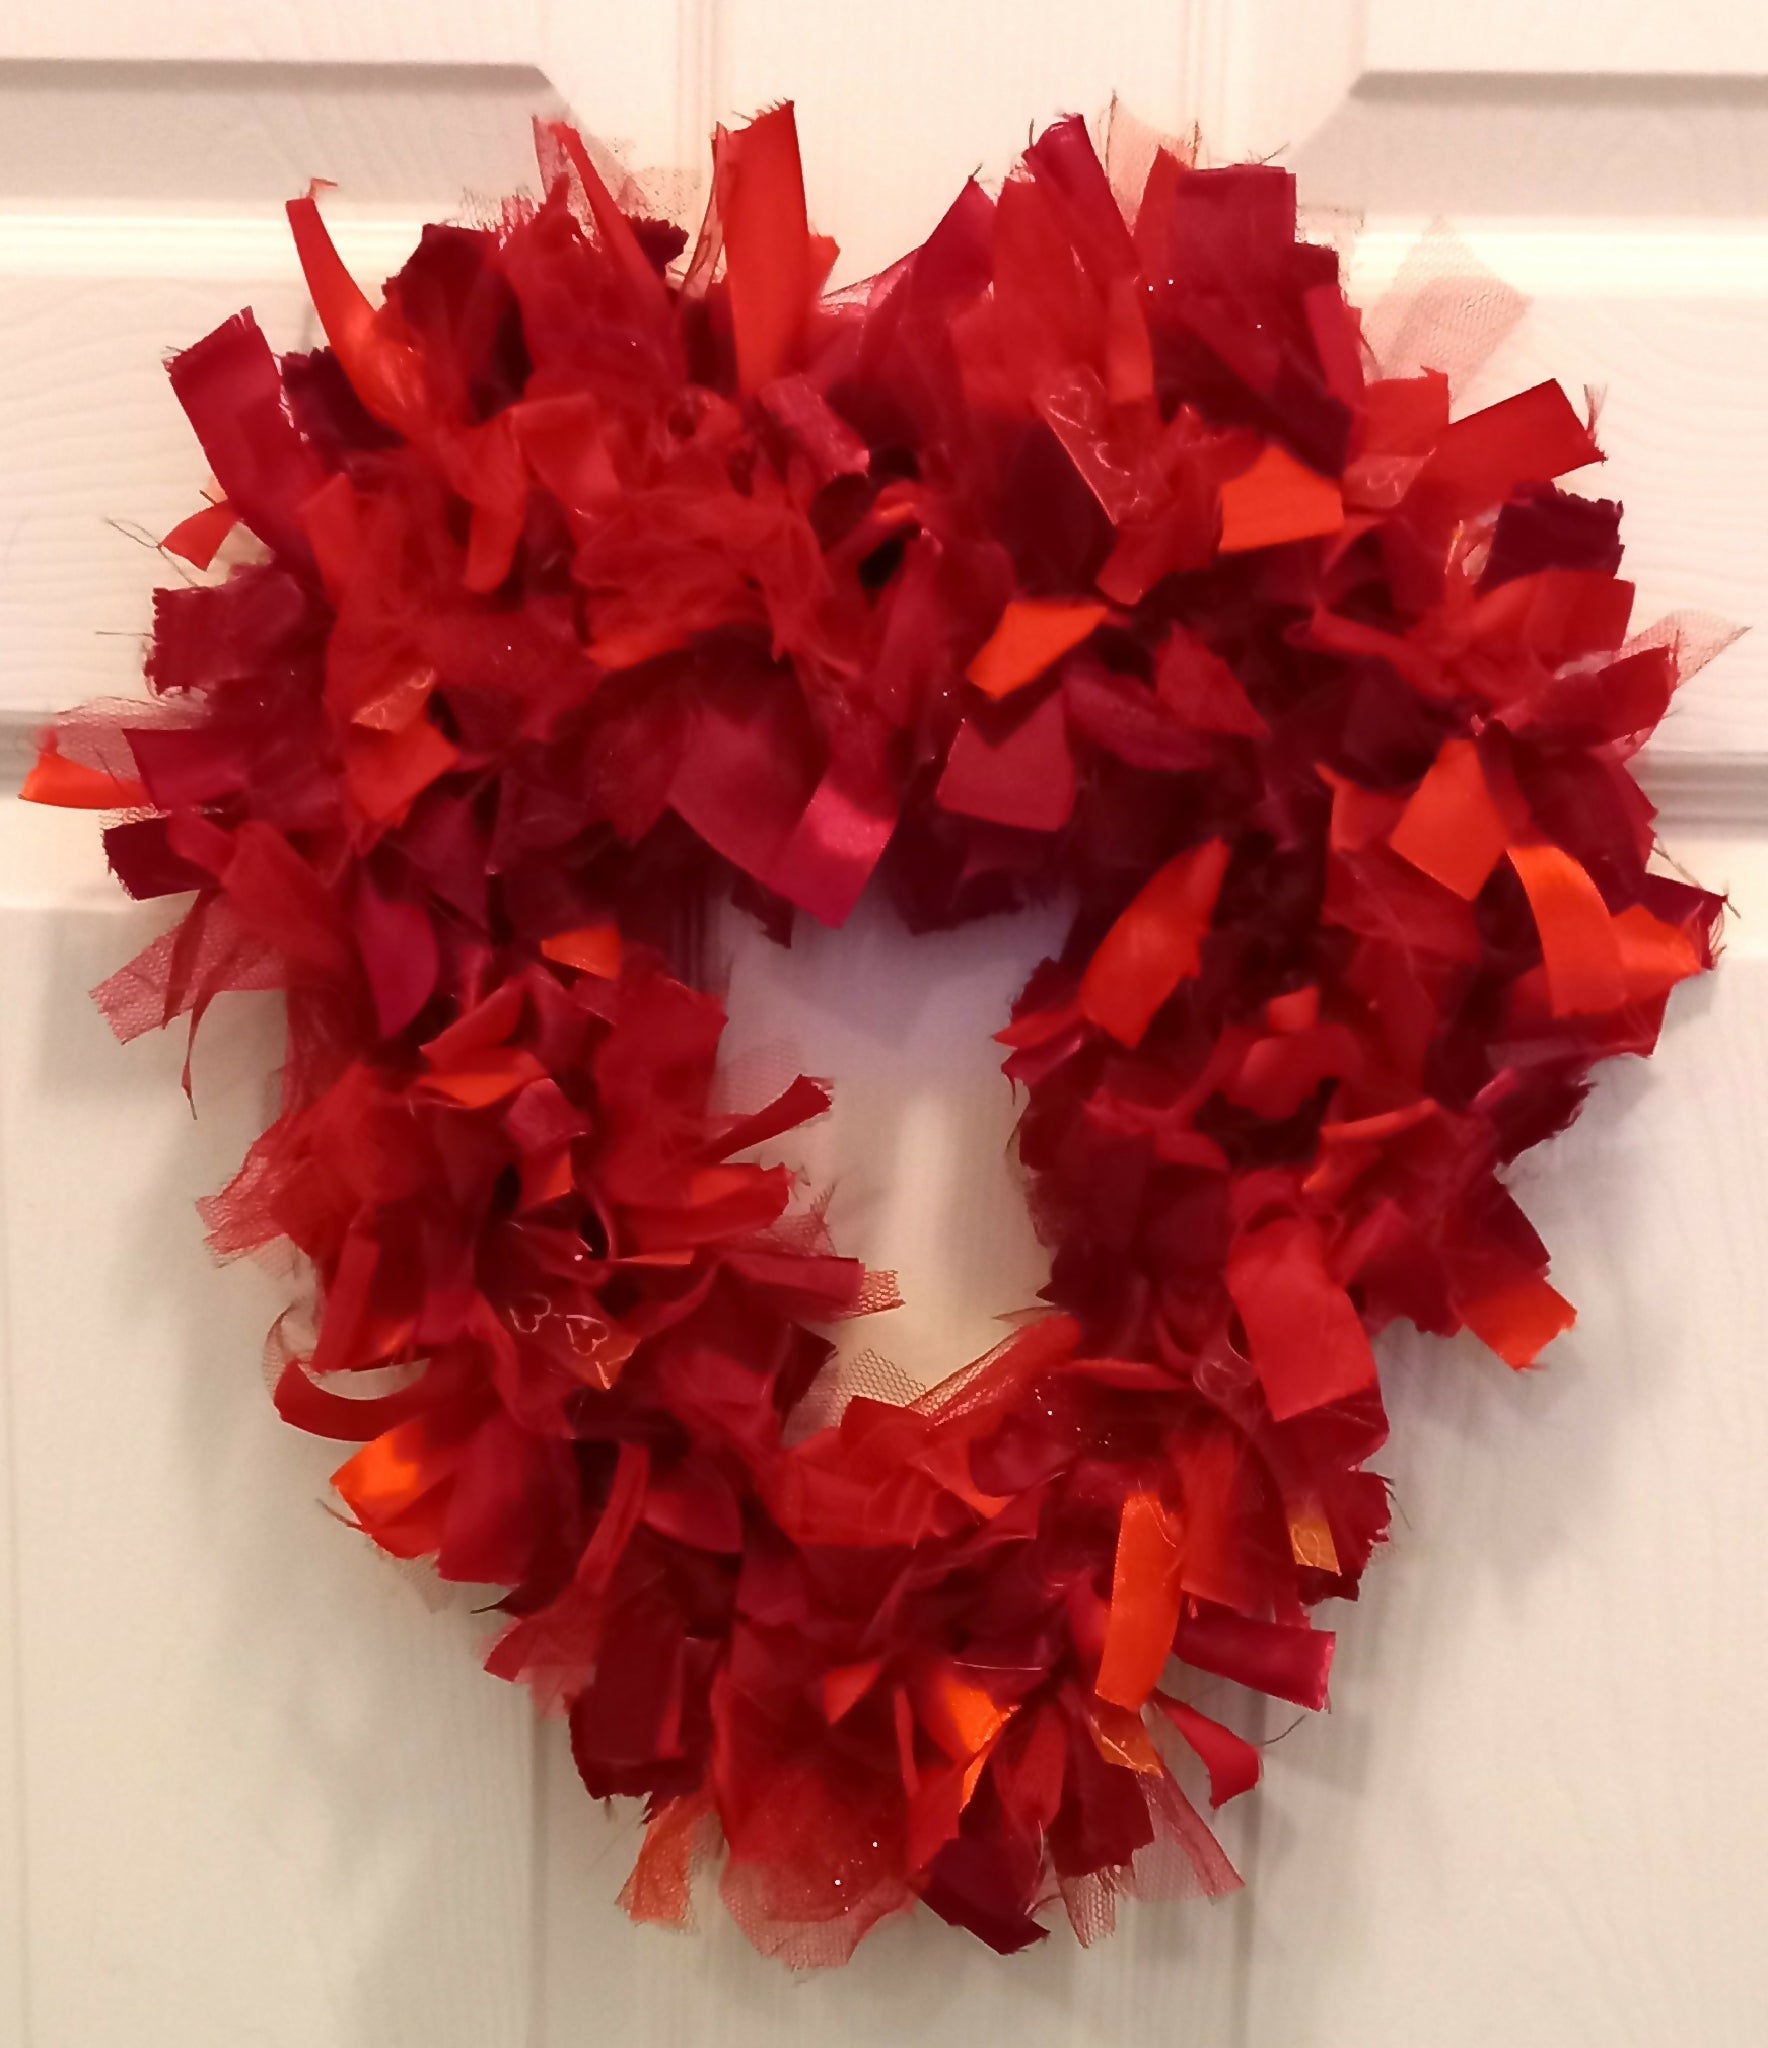 Rag Wreath Heart Shaped in Reds